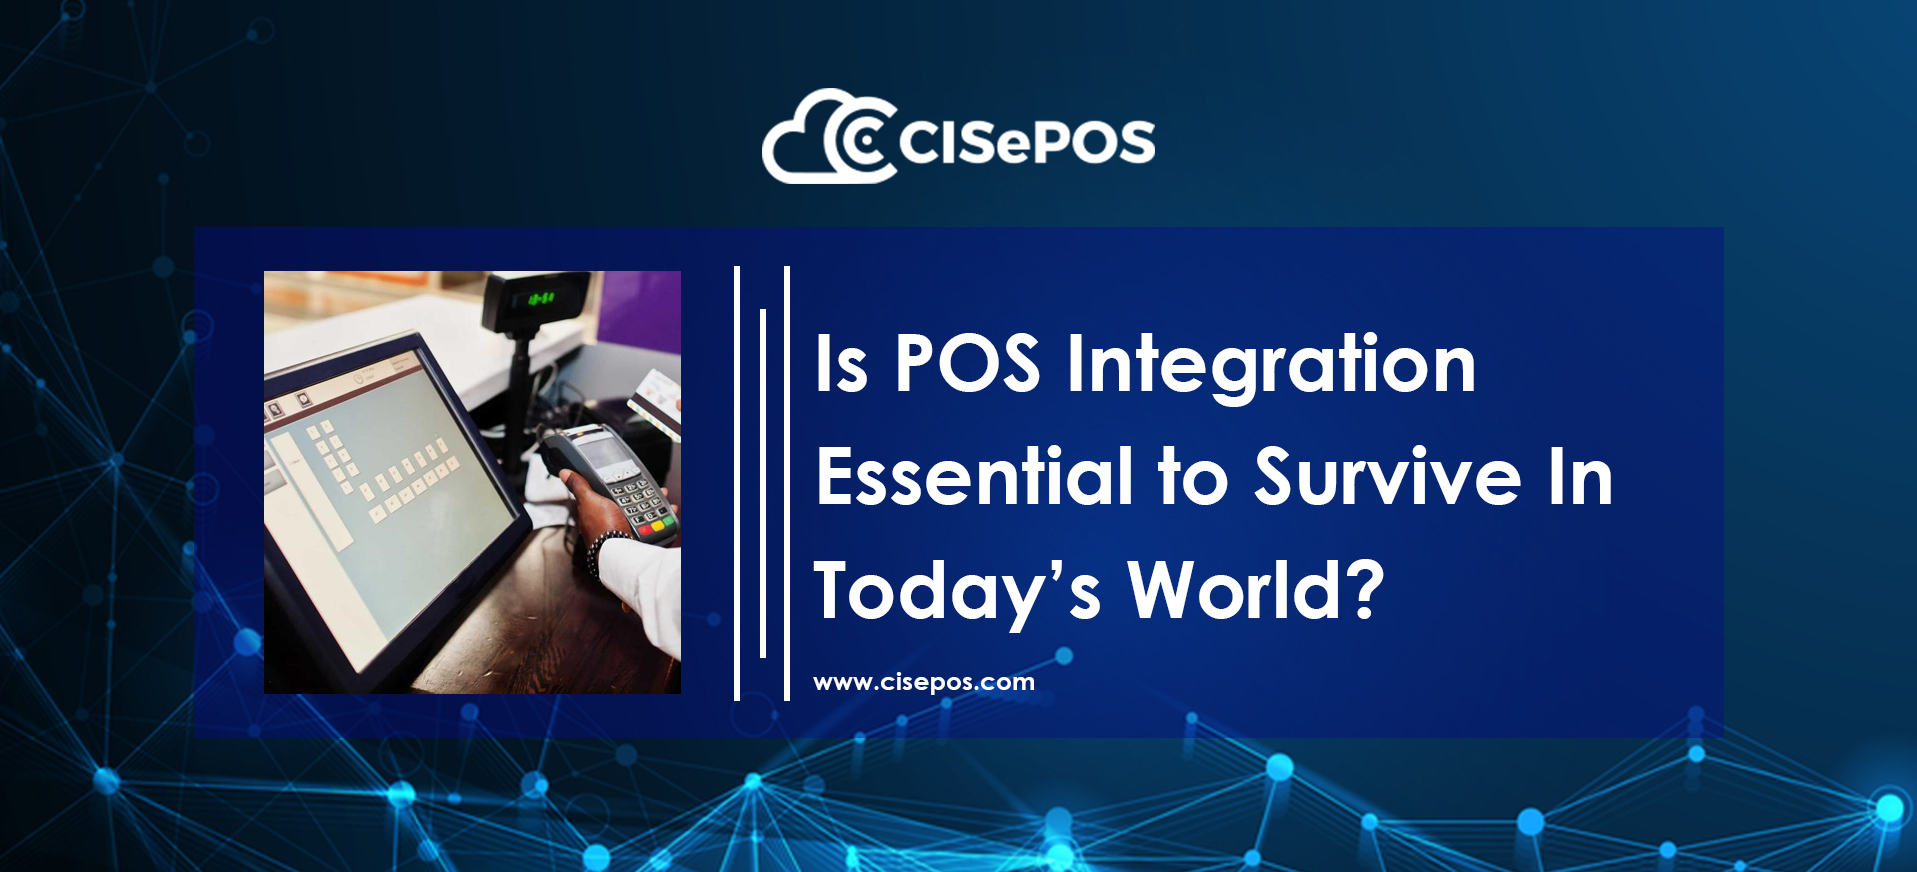 Is POS Integration Essential to Survive In Today’s World?